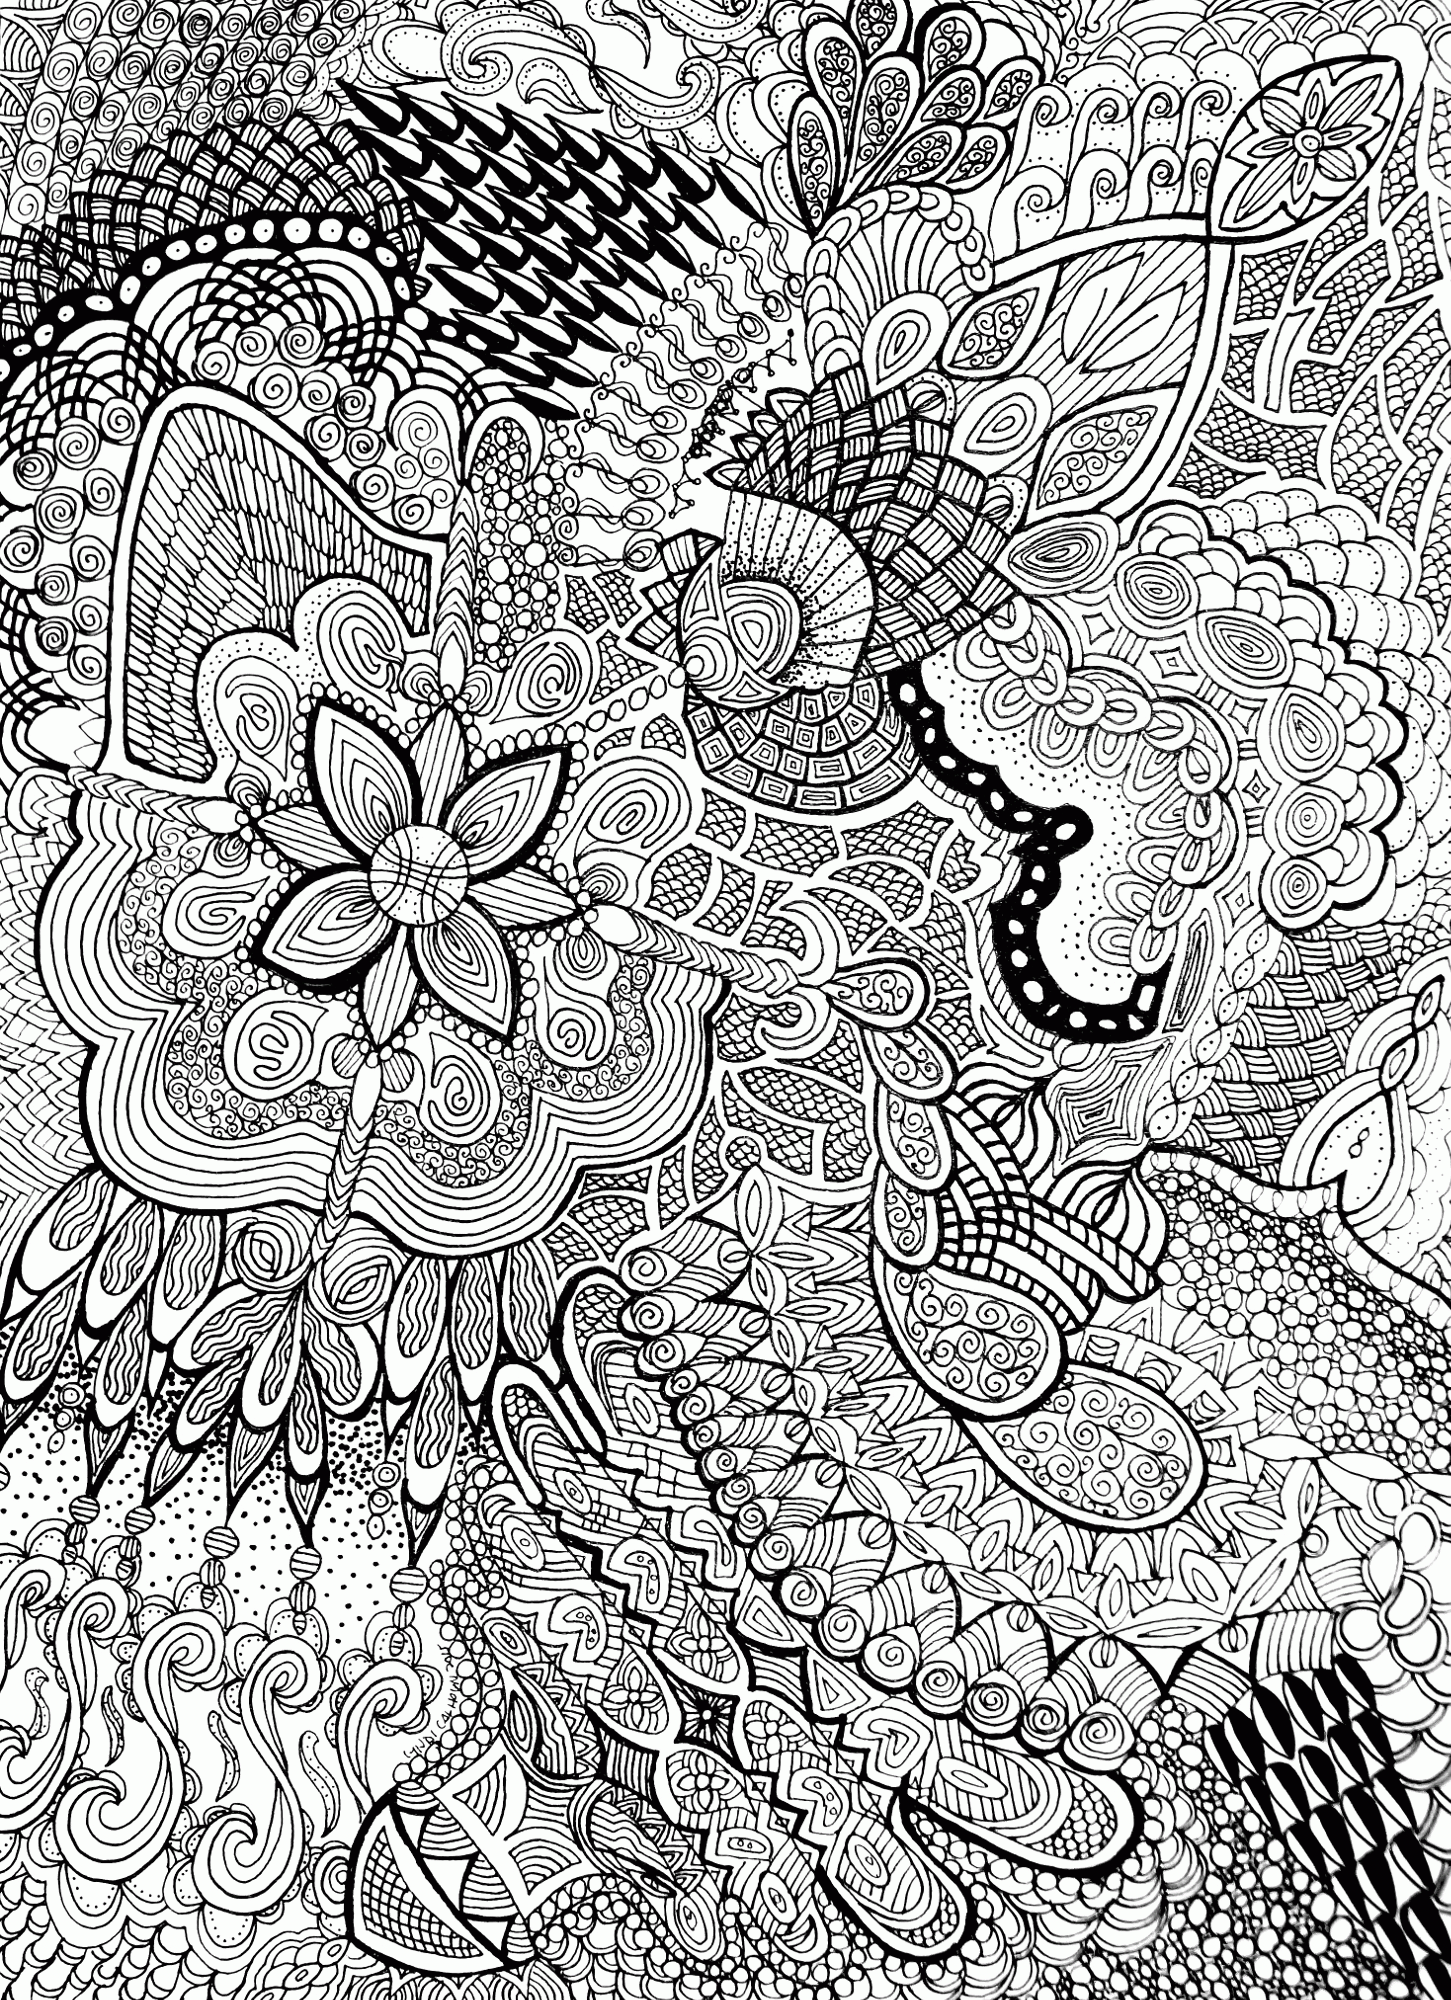 Abstract Flower Pattern Coloring Page – Contemplative Coloring